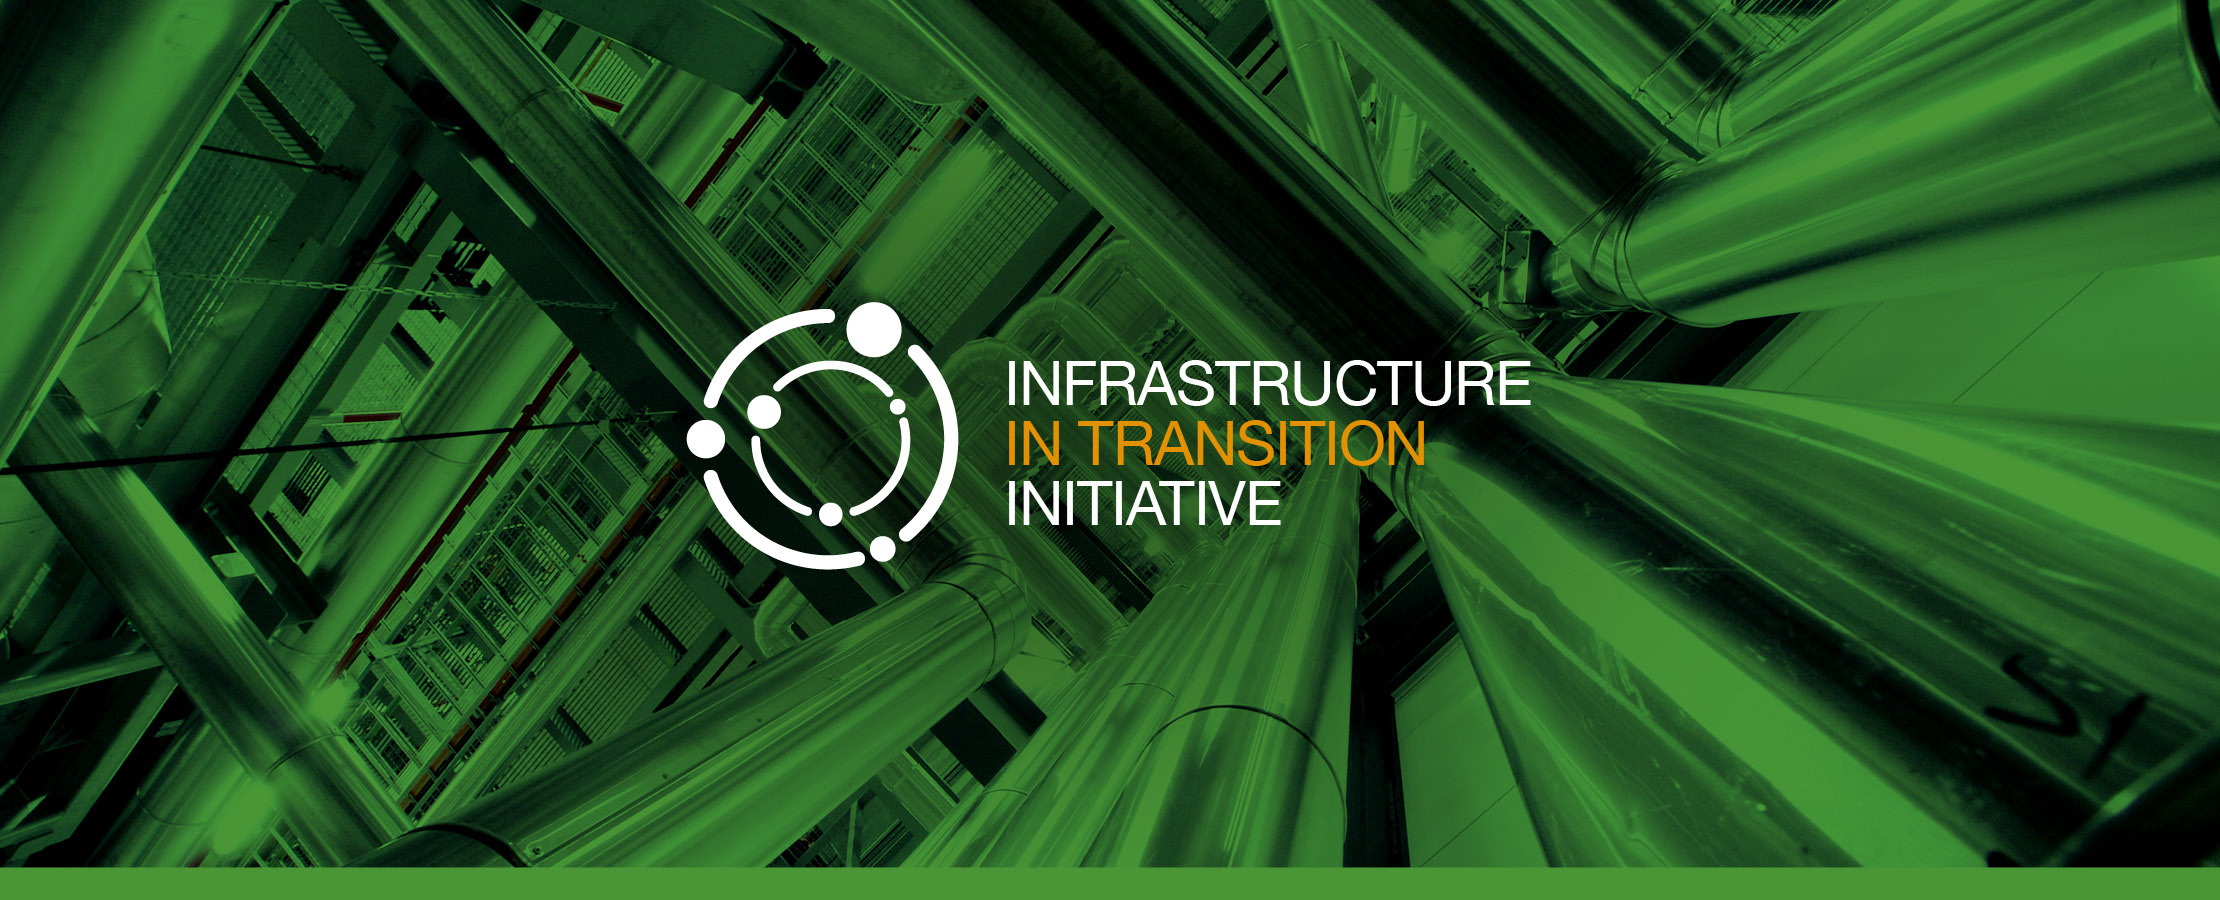 Infrastructure In Transition Initiative Web Banner 2220X900